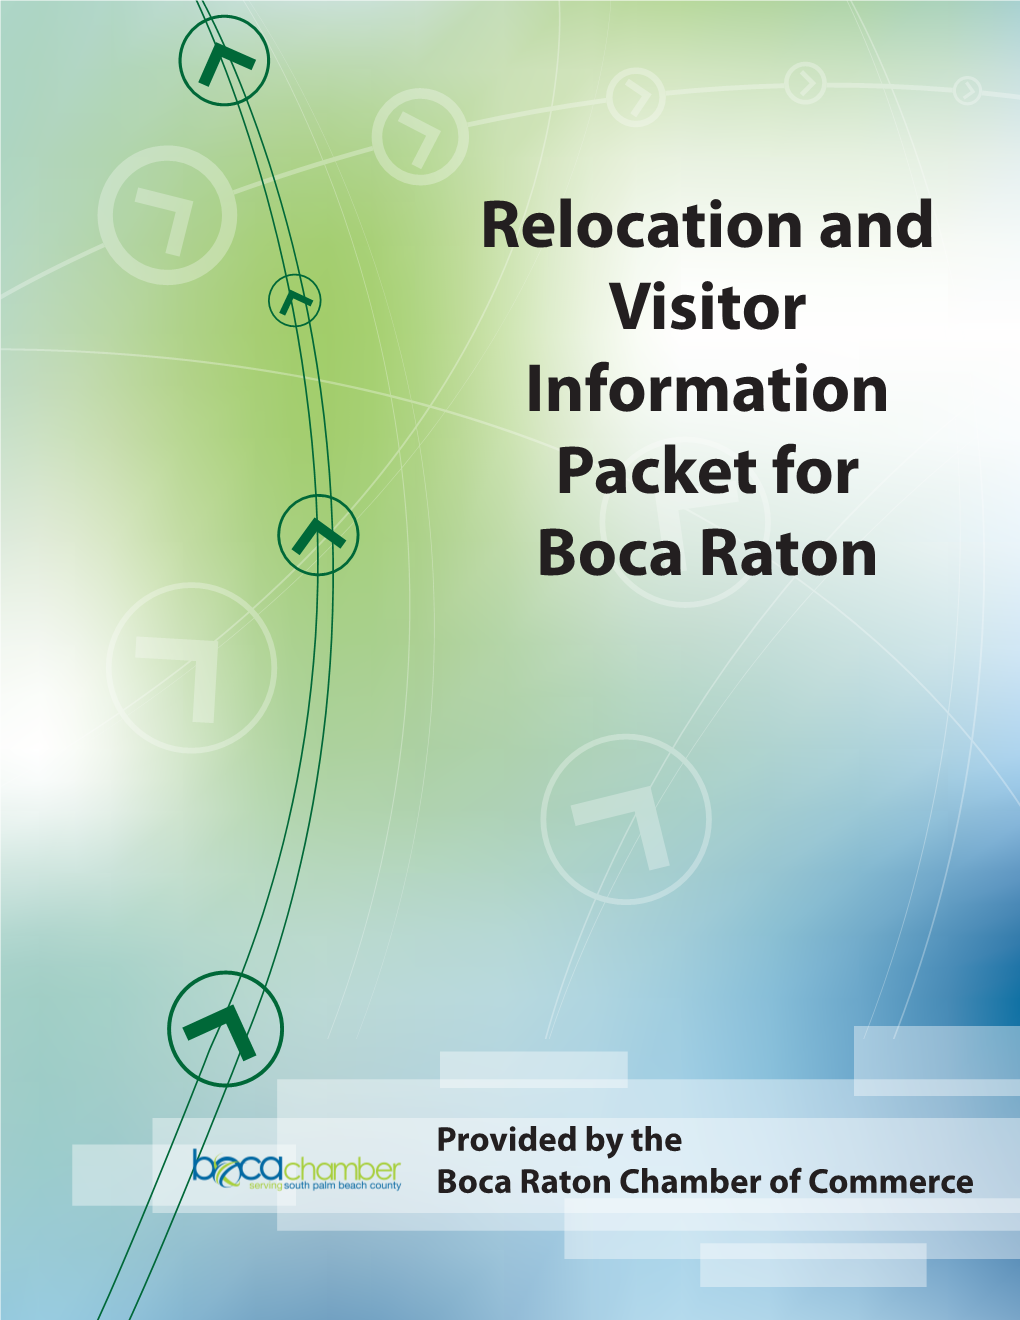 Relocation and Visitor Information Packet for Boca Raton